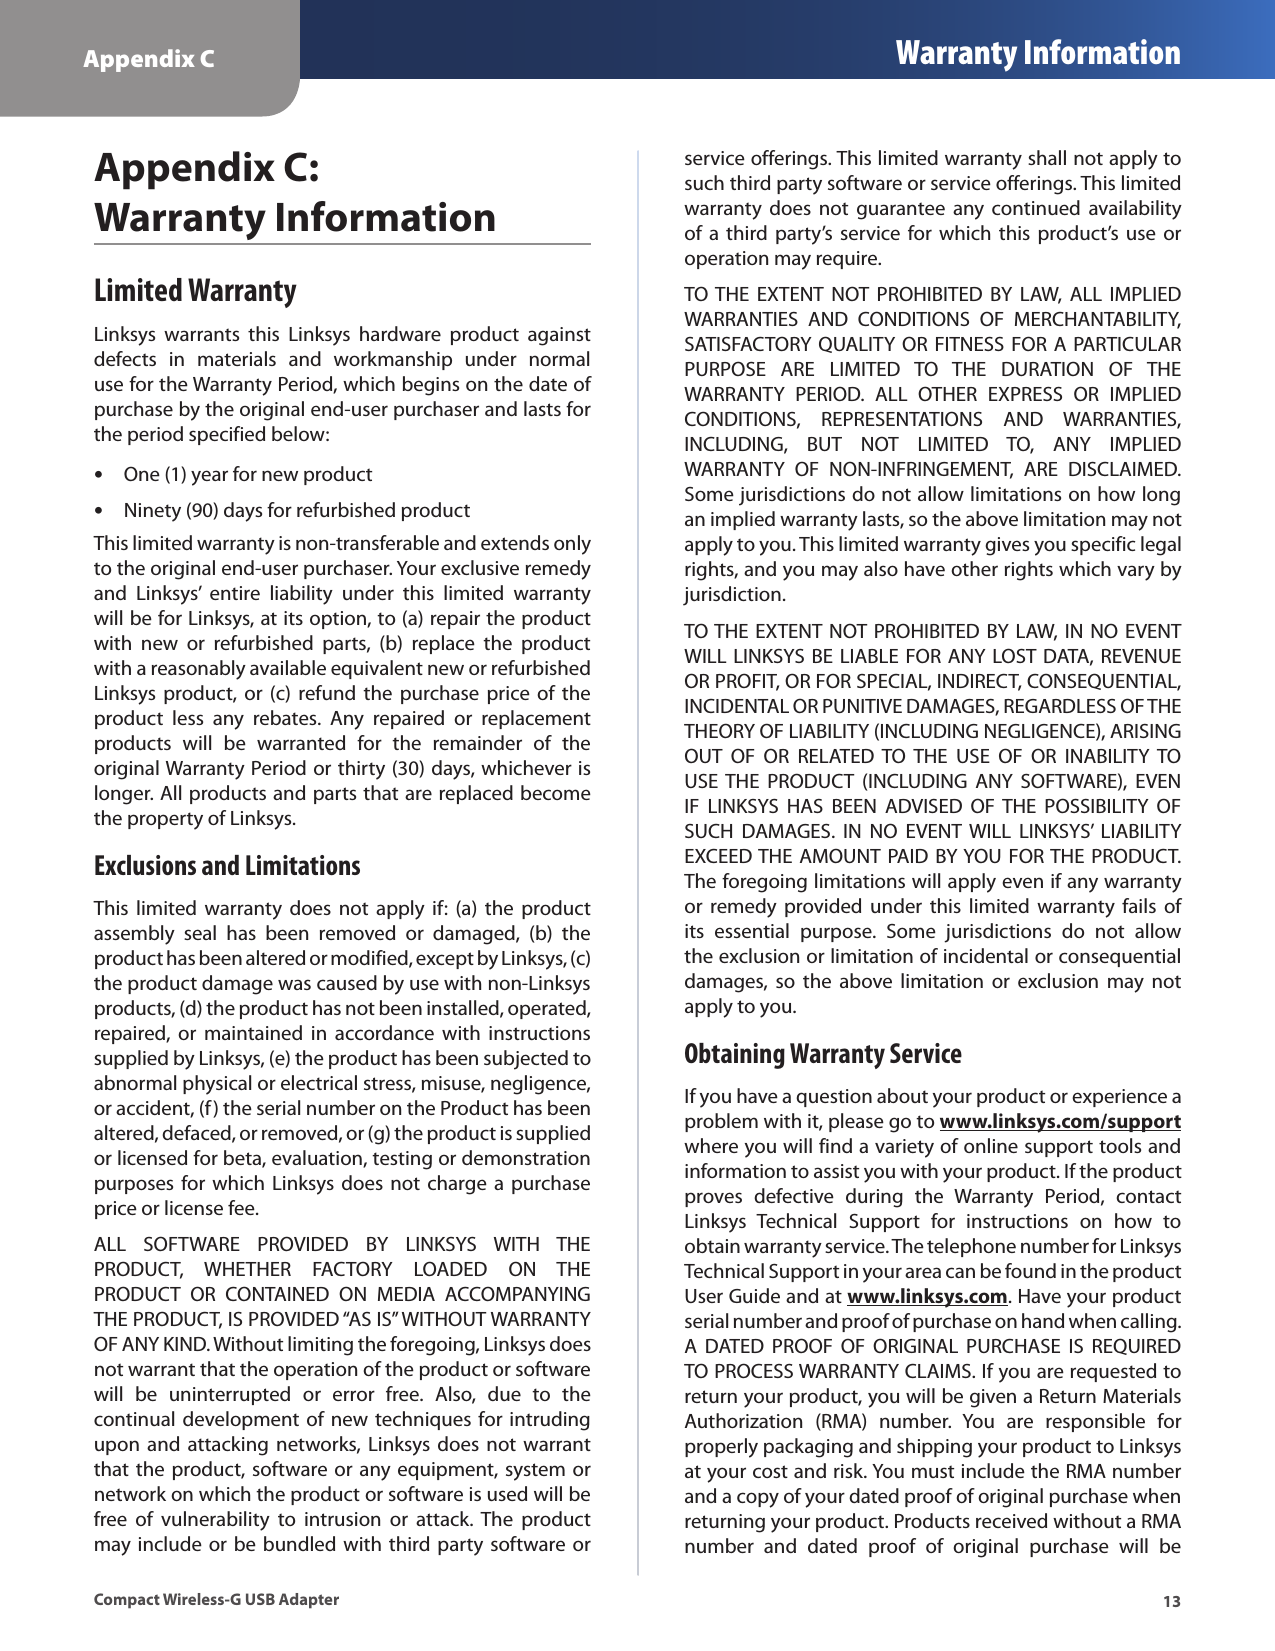 Appendix C Warranty Information13Compact Wireless-G USB AdapterAppendix C:  Warranty InformationLimited WarrantyLinksys  warrants  this  Linksys  hardware  product  against defects  in  materials  and  workmanship  under  normal use for the Warranty Period, which begins on the date of purchase by the original end-user purchaser and lasts for the period specified below:One (1) year for new product sNinety (90) days for refurbished product sThis limited warranty is non-transferable and extends only to the original end-user purchaser. Your exclusive remedy and  Linksys’  entire  liability  under  this  limited  warranty will be for Linksys, at its option, to (a) repair the product with  new  or  refurbished  parts,  (b)  replace  the  product with a reasonably available equivalent new or refurbished Linksys  product,  or  (c) refund  the  purchase price  of the product  less  any  rebates.  Any  repaired  or  replacement products  will  be  warranted  for  the  remainder  of  the original Warranty Period or thirty (30) days, whichever is longer. All products and parts that are replaced become the property of Linksys.Exclusions and LimitationsThis  limited warranty  does  not  apply  if:  (a)  the  product assembly  seal  has  been  removed  or  damaged,  (b)  the product has been altered or modified, except by Linksys, (c) the product damage was caused by use with non-Linksys products, (d) the product has not been installed, operated, repaired, or  maintained  in  accordance  with  instructions supplied by Linksys, (e) the product has been subjected to abnormal physical or electrical stress, misuse, negligence, or accident, (f) the serial number on the Product has been altered, defaced, or removed, or (g) the product is supplied or licensed for beta, evaluation, testing or demonstration purposes for  which  Linksys does  not charge a  purchase price or license fee.ALL  SOFTWARE  PROVIDED  BY  LINKSYS  WITH  THE PRODUCT,  WHETHER  FACTORY  LOADED  ON  THE PRODUCT  OR  CONTAINED  ON  MEDIA  ACCOMPANYING THE PRODUCT, IS PROVIDED “AS IS” WITHOUT WARRANTY OF ANY KIND. Without limiting the foregoing, Linksys does not warrant that the operation of the product or software will  be  uninterrupted  or  error  free.  Also,  due  to  the continual development of  new techniques for intruding upon and  attacking  networks, Linksys  does  not warrant that the  product, software or any equipment, system or network on which the product or software is used will be free  of  vulnerability  to  intrusion  or  attack.  The  product may include  or  be  bundled  with  third party  software or service offerings. This limited warranty shall not apply to such third party software or service offerings. This limited warranty  does  not  guarantee  any  continued  availability of  a  third party’s  service  for  which  this product’s  use or operation may require. TO THE  EXTENT  NOT  PROHIBITED  BY  LAW,  ALL  IMPLIED WARRANTIES  AND  CONDITIONS  OF  MERCHANTABILITY, SATISFACTORY QUALITY OR FITNESS FOR A PARTICULAR PURPOSE  ARE  LIMITED  TO  THE  DURATION  OF  THE WARRANTY  PERIOD.  ALL  OTHER  EXPRESS  OR  IMPLIED CONDITIONS,  REPRESENTATIONS  AND  WARRANTIES, INCLUDING,  BUT  NOT  LIMITED  TO,  ANY  IMPLIED WARRANTY  OF  NON-INFRINGEMENT,  ARE  DISCLAIMED. Some jurisdictions do not allow limitations on how long an implied warranty lasts, so the above limitation may not apply to you. This limited warranty gives you specific legal rights, and you may also have other rights which vary by jurisdiction.TO THE  EXTENT NOT PROHIBITED BY LAW, IN NO EVENT WILL LINKSYS BE LIABLE FOR ANY LOST DATA,  REVENUE OR PROFIT, OR FOR SPECIAL, INDIRECT, CONSEQUENTIAL, INCIDENTAL OR PUNITIVE DAMAGES, REGARDLESS OF THE THEORY OF LIABILITY (INCLUDING NEGLIGENCE), ARISING OUT  OF  OR  RELATED  TO  THE  USE  OF  OR  INABILITY  TO USE THE  PRODUCT  (INCLUDING  ANY  SOFTWARE),  EVEN IF  LINKSYS  HAS  BEEN  ADVISED  OF  THE  POSSIBILITY  OF SUCH  DAMAGES.  IN  NO  EVENT  WILL  LINKSYS’  LIABILITY EXCEED THE AMOUNT PAID BY YOU FOR THE PRODUCT. The foregoing limitations will apply even if any warranty or  remedy  provided  under  this  limited  warranty  fails  of its  essential  purpose.  Some  jurisdictions  do  not  allow the exclusion or limitation of incidental or consequential damages,  so  the  above  limitation  or  exclusion  may  not apply to you.Obtaining Warranty ServiceIf you have a question about your product or experience a problem with it, please go to www.linksys.com/support where you will find a variety of online support tools and information to assist you with your product. If the product proves  defective  during  the  Warranty  Period,  contact Linksys  Technical  Support  for  instructions  on  how  to obtain warranty service. The telephone number for Linksys Technical Support in your area can be found in the product User Guide and at www.linksys.com. Have your product serial number and proof of purchase on hand when calling. A  DATED  PROOF  OF  ORIGINAL  PURCHASE  IS  REQUIRED TO PROCESS WARRANTY CLAIMS. If you are requested to return your product, you will be given a Return Materials Authorization  (RMA)  number.  You  are  responsible  for properly packaging and shipping your product to Linksys at your cost and risk. You must include the RMA number and a copy of your dated proof of original purchase when returning your product. Products received without a RMA number  and  dated  proof  of  original  purchase  will  be 